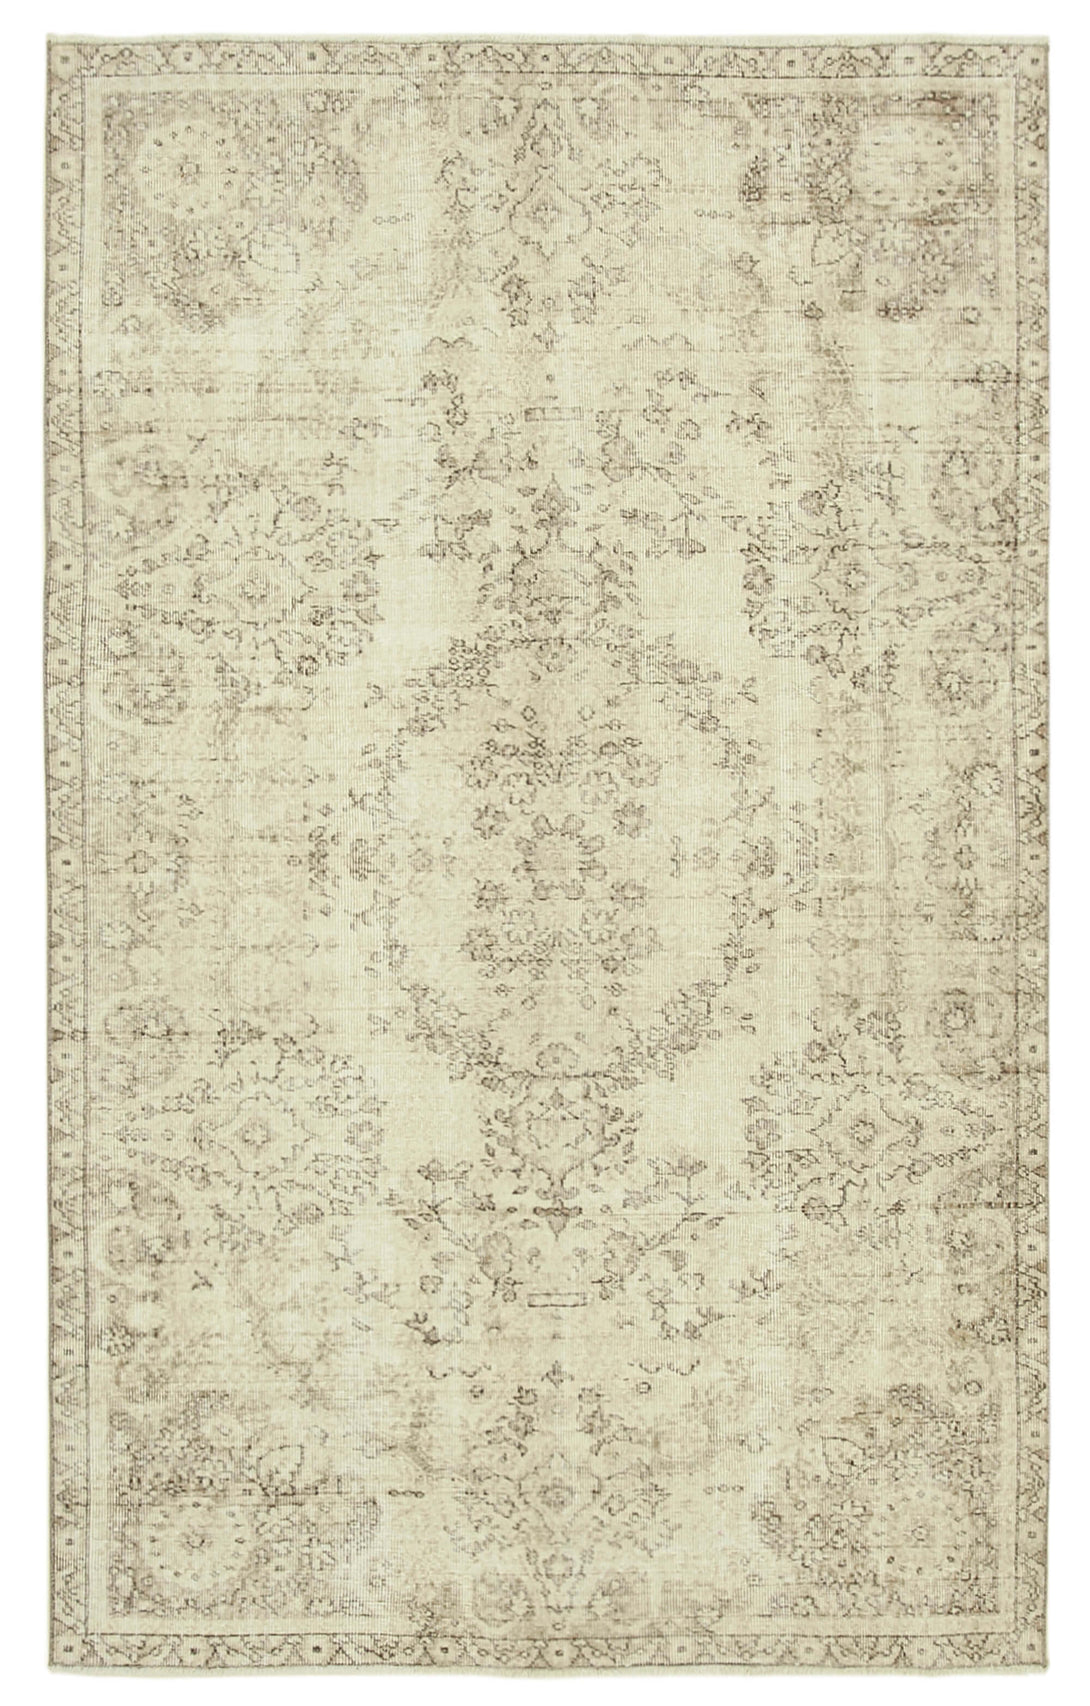 Handmade White Wash Area Rug > Design# OL-AC-39025 > Size: 5'-5" x 8'-11", Carpet Culture Rugs, Handmade Rugs, NYC Rugs, New Rugs, Shop Rugs, Rug Store, Outlet Rugs, SoHo Rugs, Rugs in USA